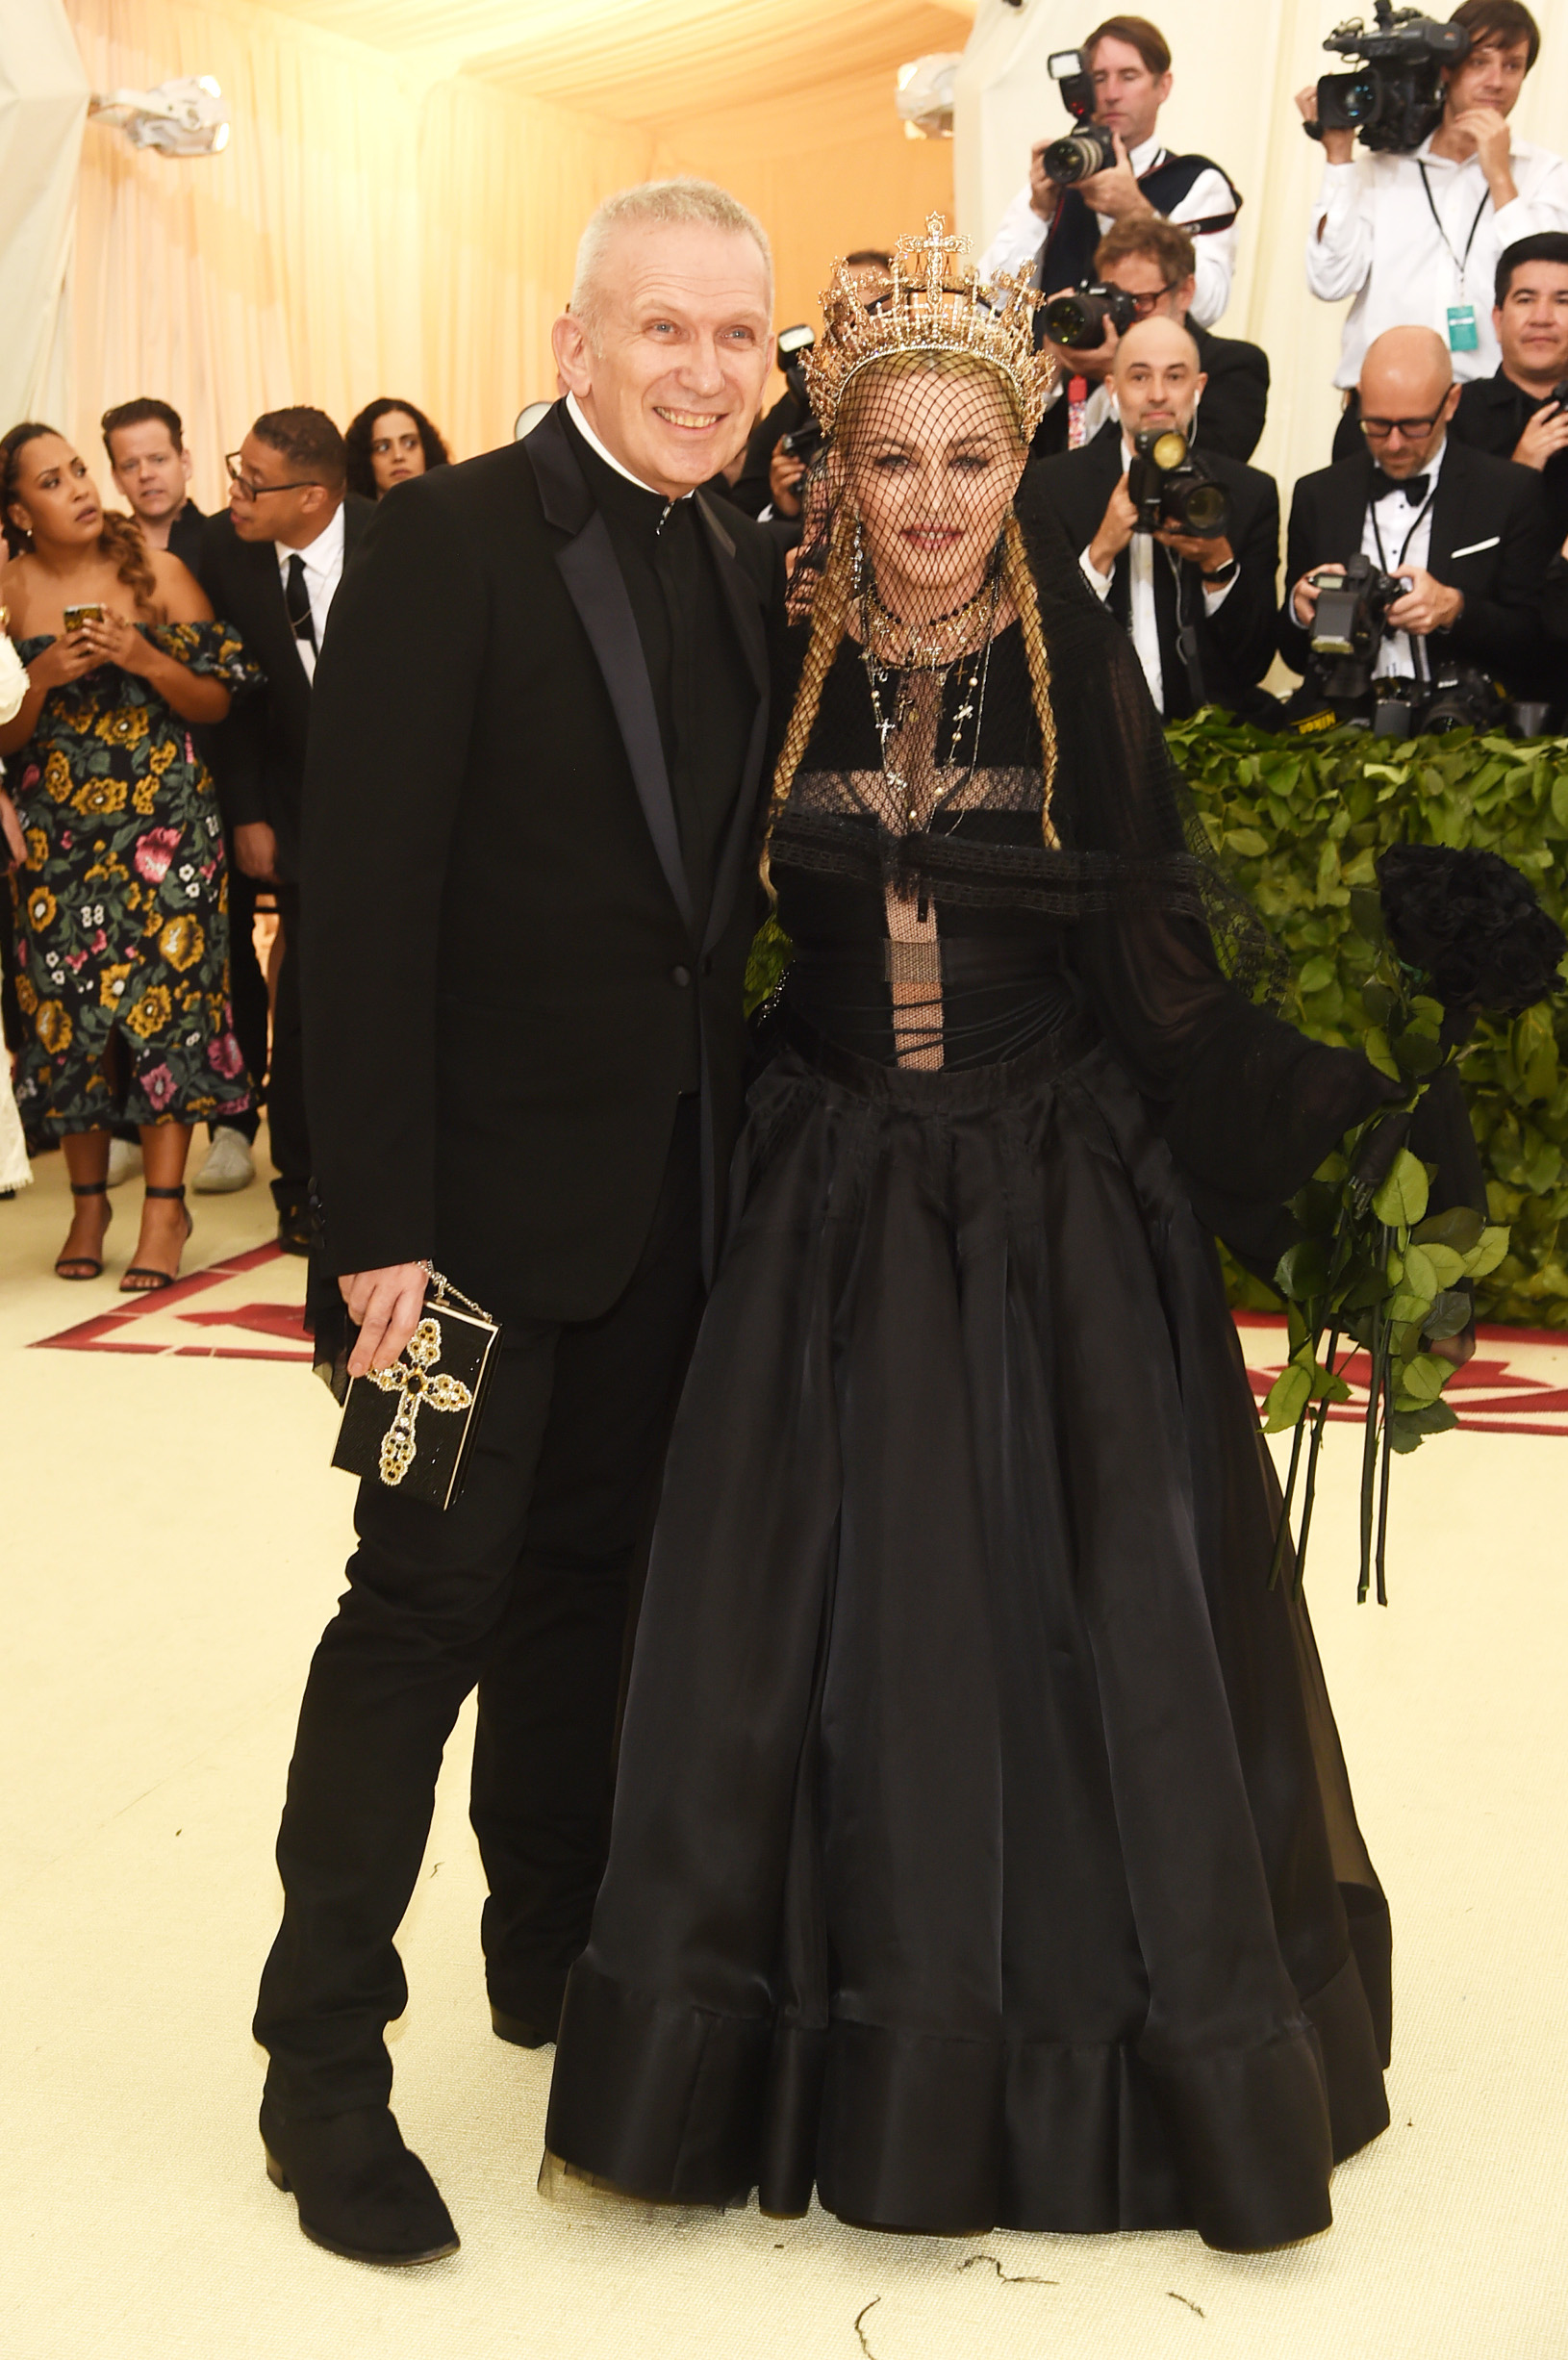 NEW YORK, NY - MAY 07:  Jean Paul Gaultier and Madonna attend the Heavenly Bodies: Fashion & The Catholic Imagination Costume Institute Gala at The Metropolitan Museum of Art on May 7, 2018 in New York City.  (Photo by Jamie McCarthy/Getty Images)